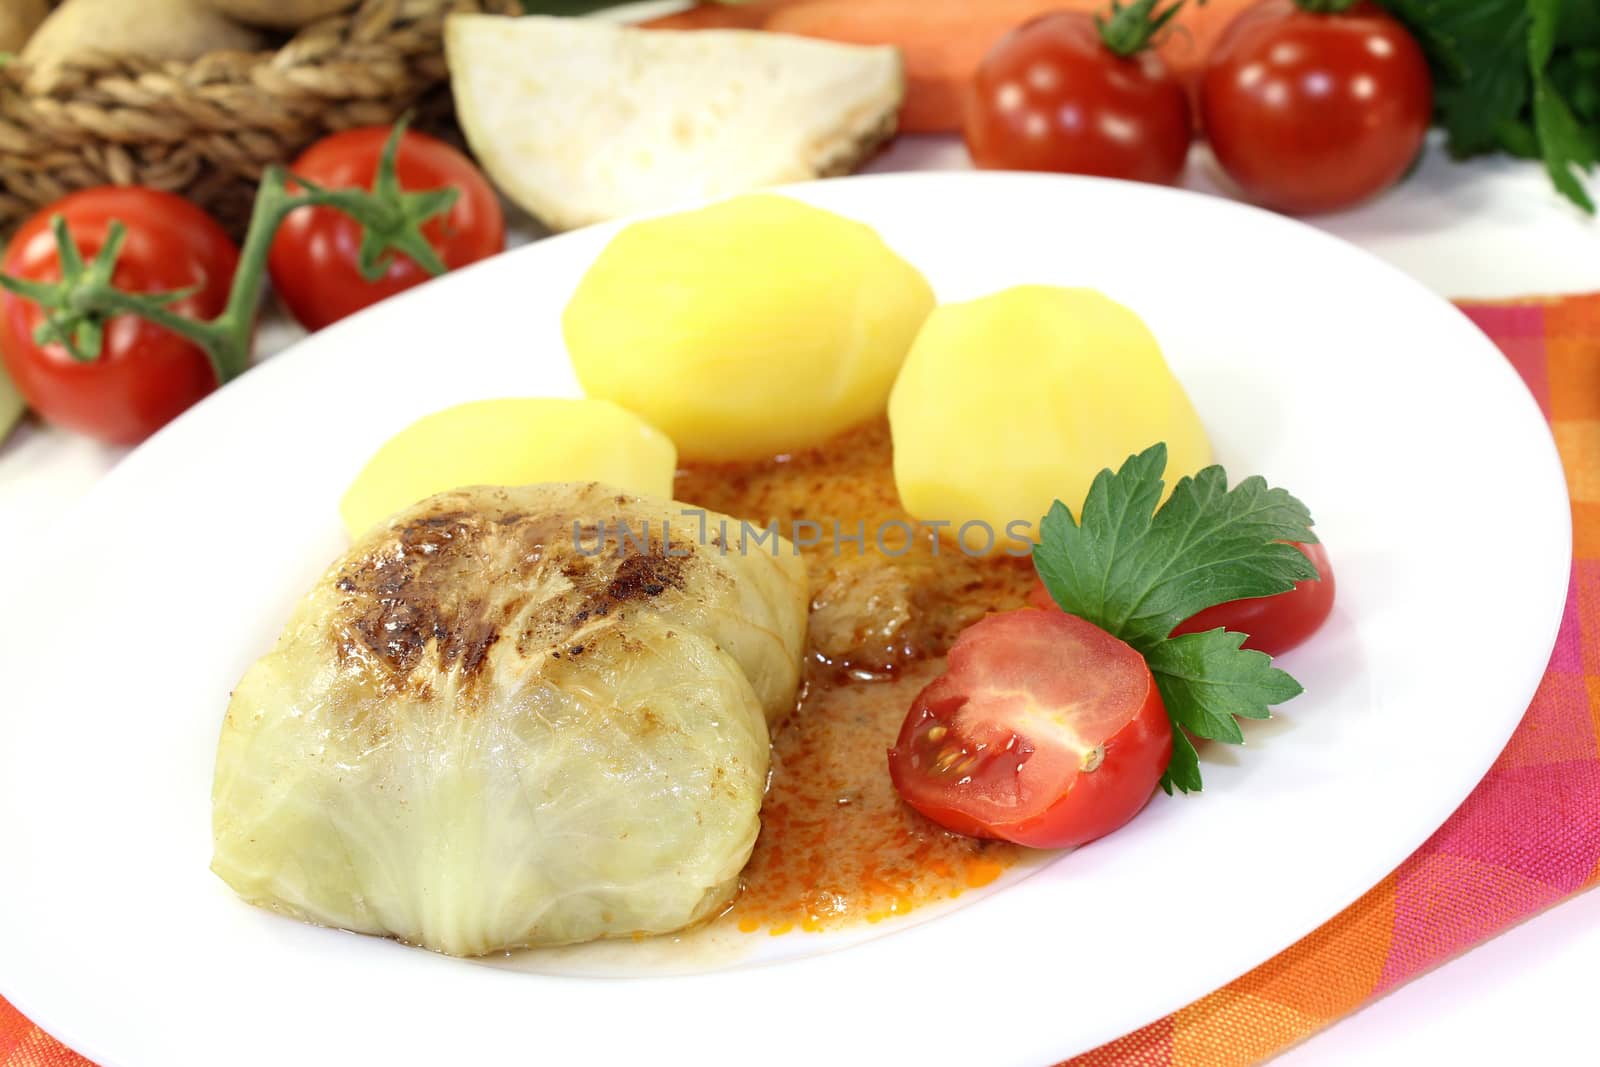 Stuffed cabbage with potatoes and gravy by discovery